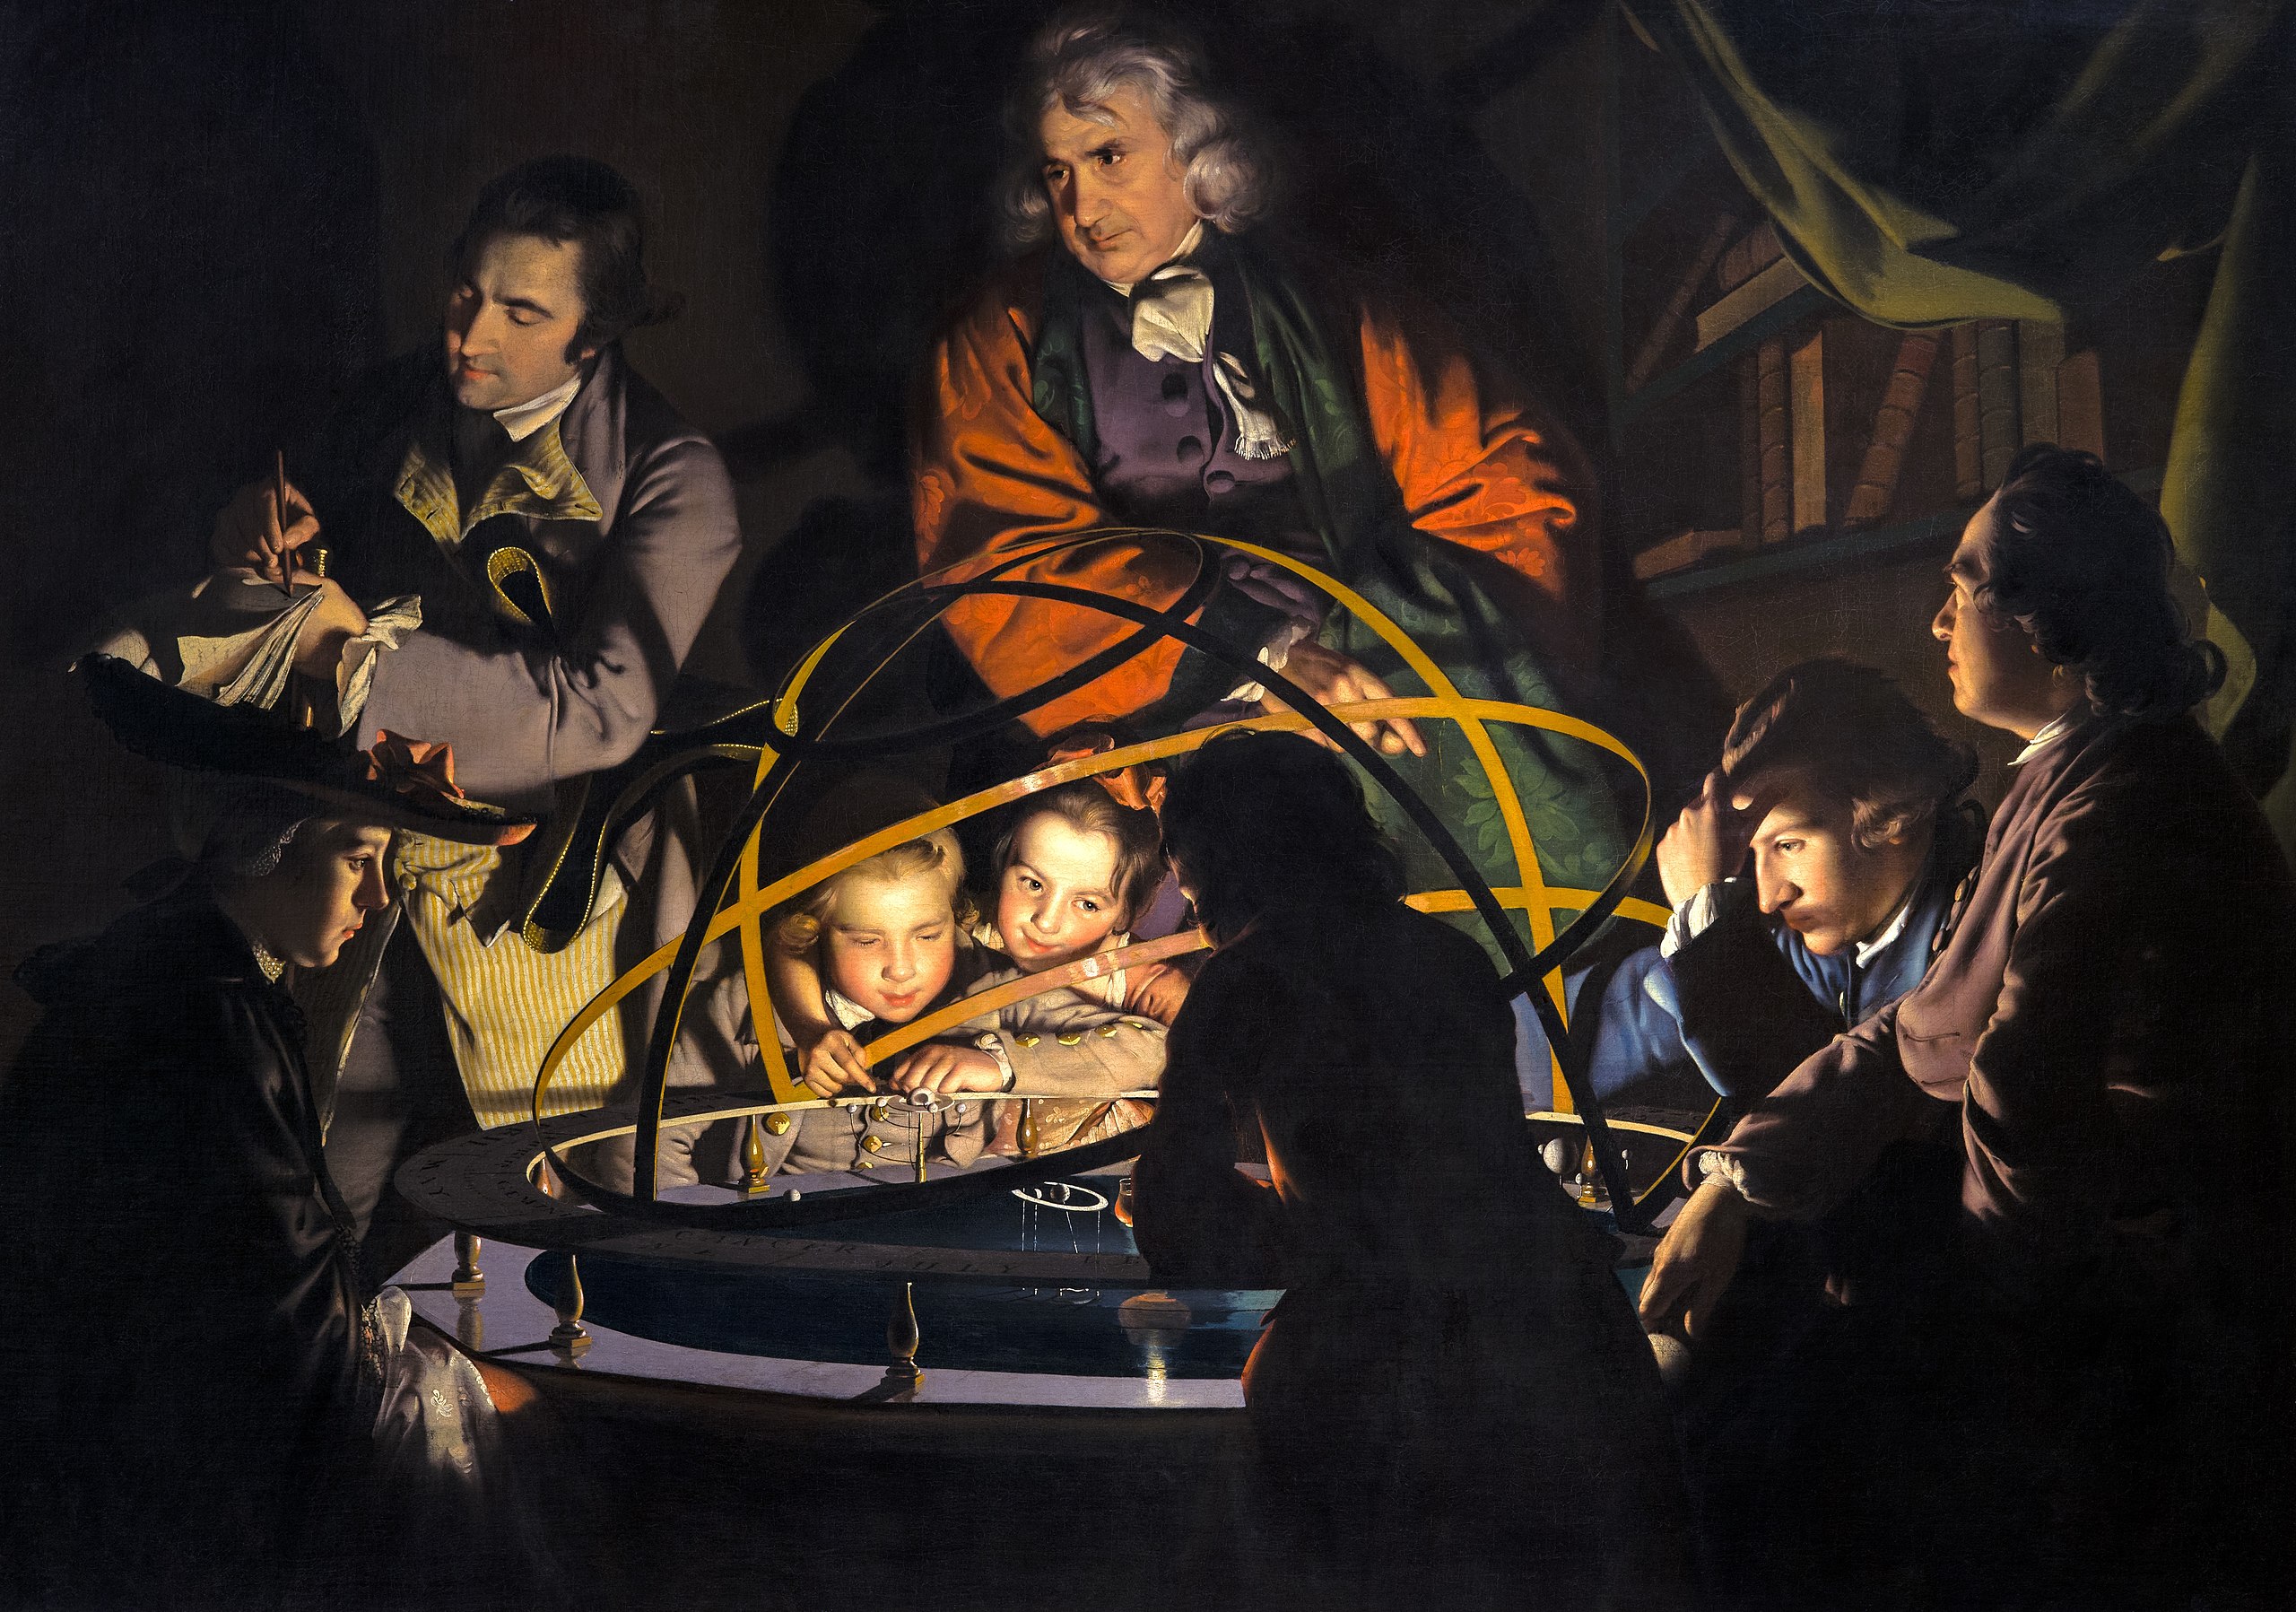 Joseph Wright of Derby, A Philosopher Giving a Lecture at the Orrery (in which a lamp is put in place of the sun), c. 1763–65, oil on canvas, 4' 10" x 6' 8" (Derby Museums and Art Gallery, Derby, photo: Hohum, public domain)